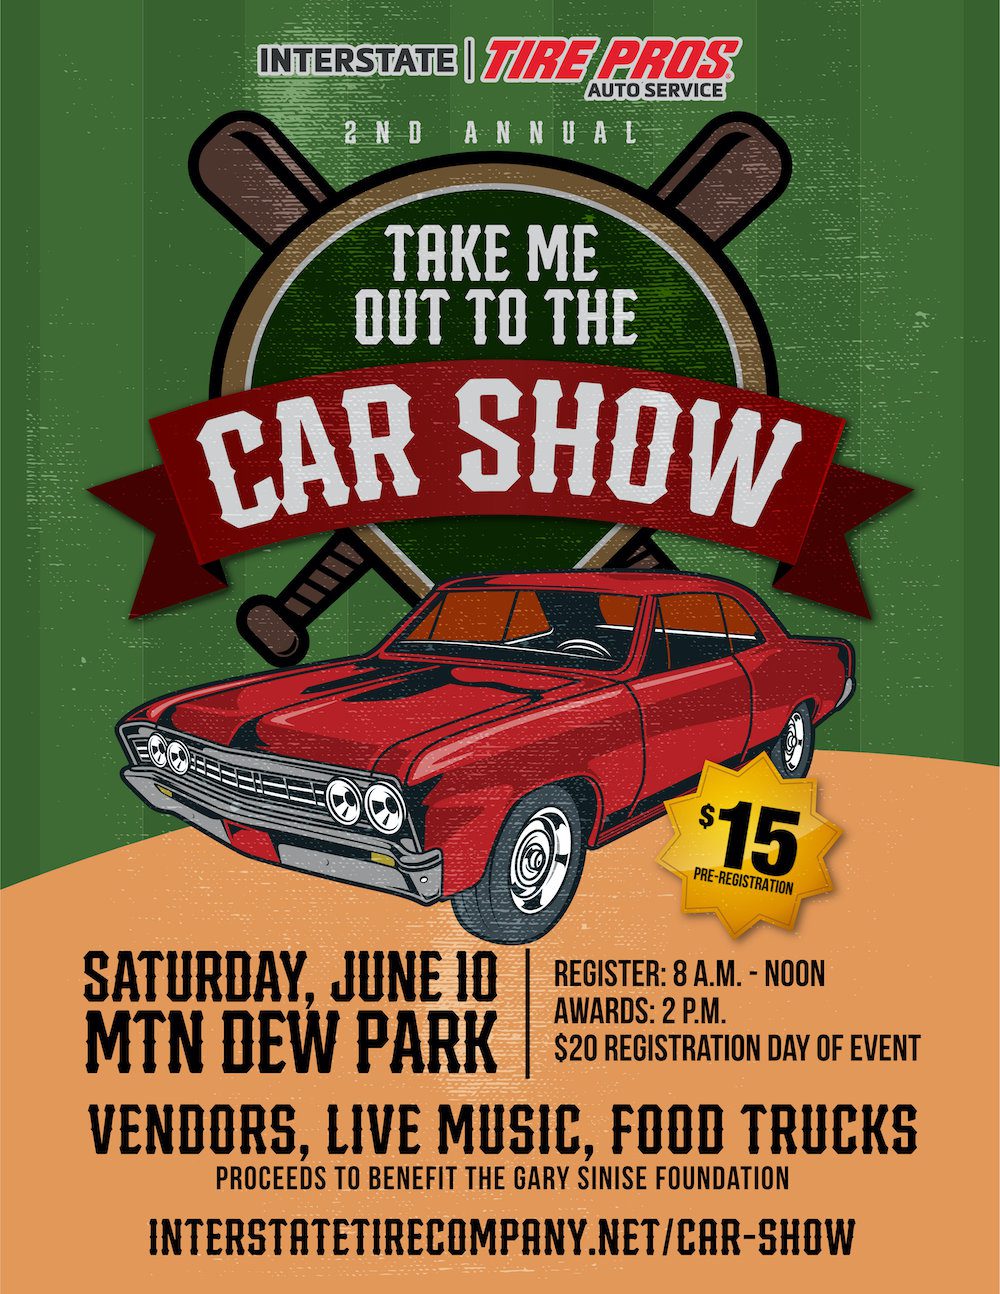 Flyer for car show event